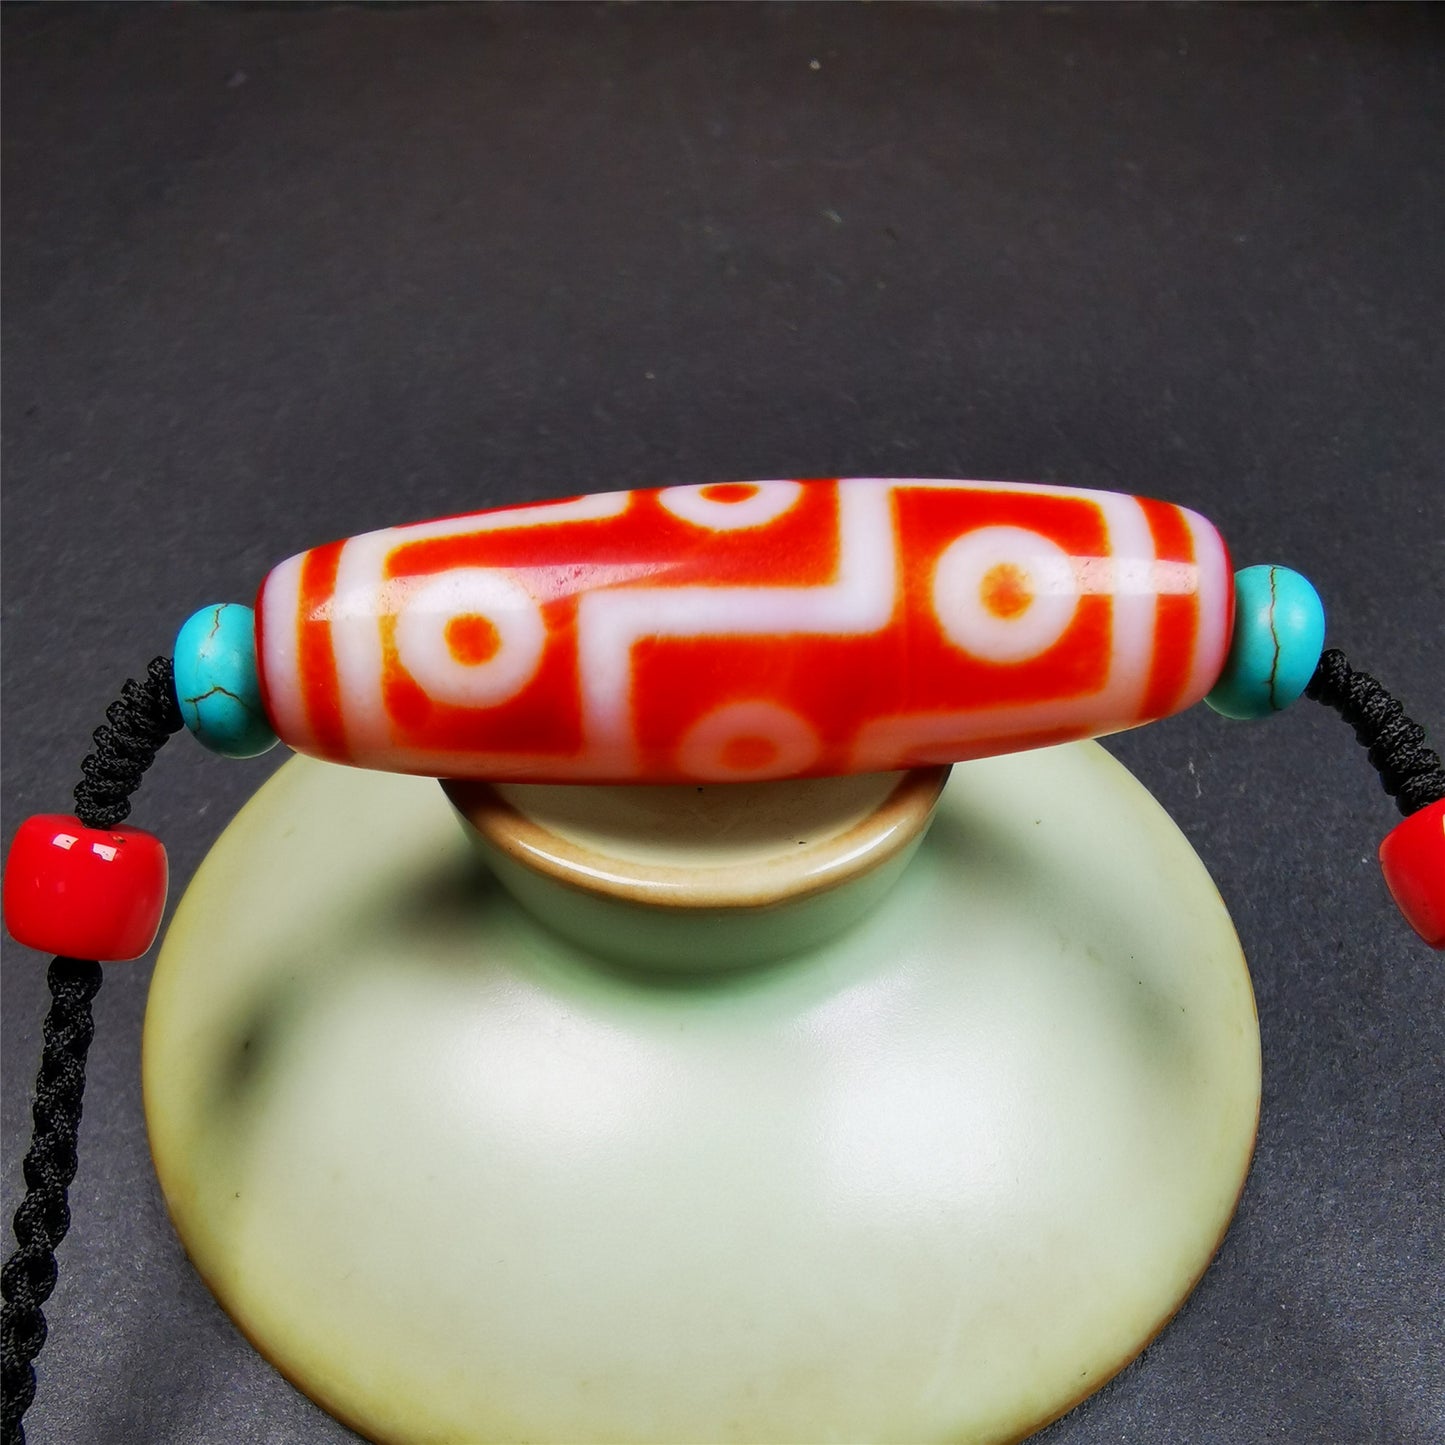 This necklace was hand-woven by Tibetans from Baiyu County, the main bead is a fire agate 9 eyes dzi, paired with 2 turquoise beads and 2 red agate beads,about 30 years old. The length of the necklace can be adjusted.